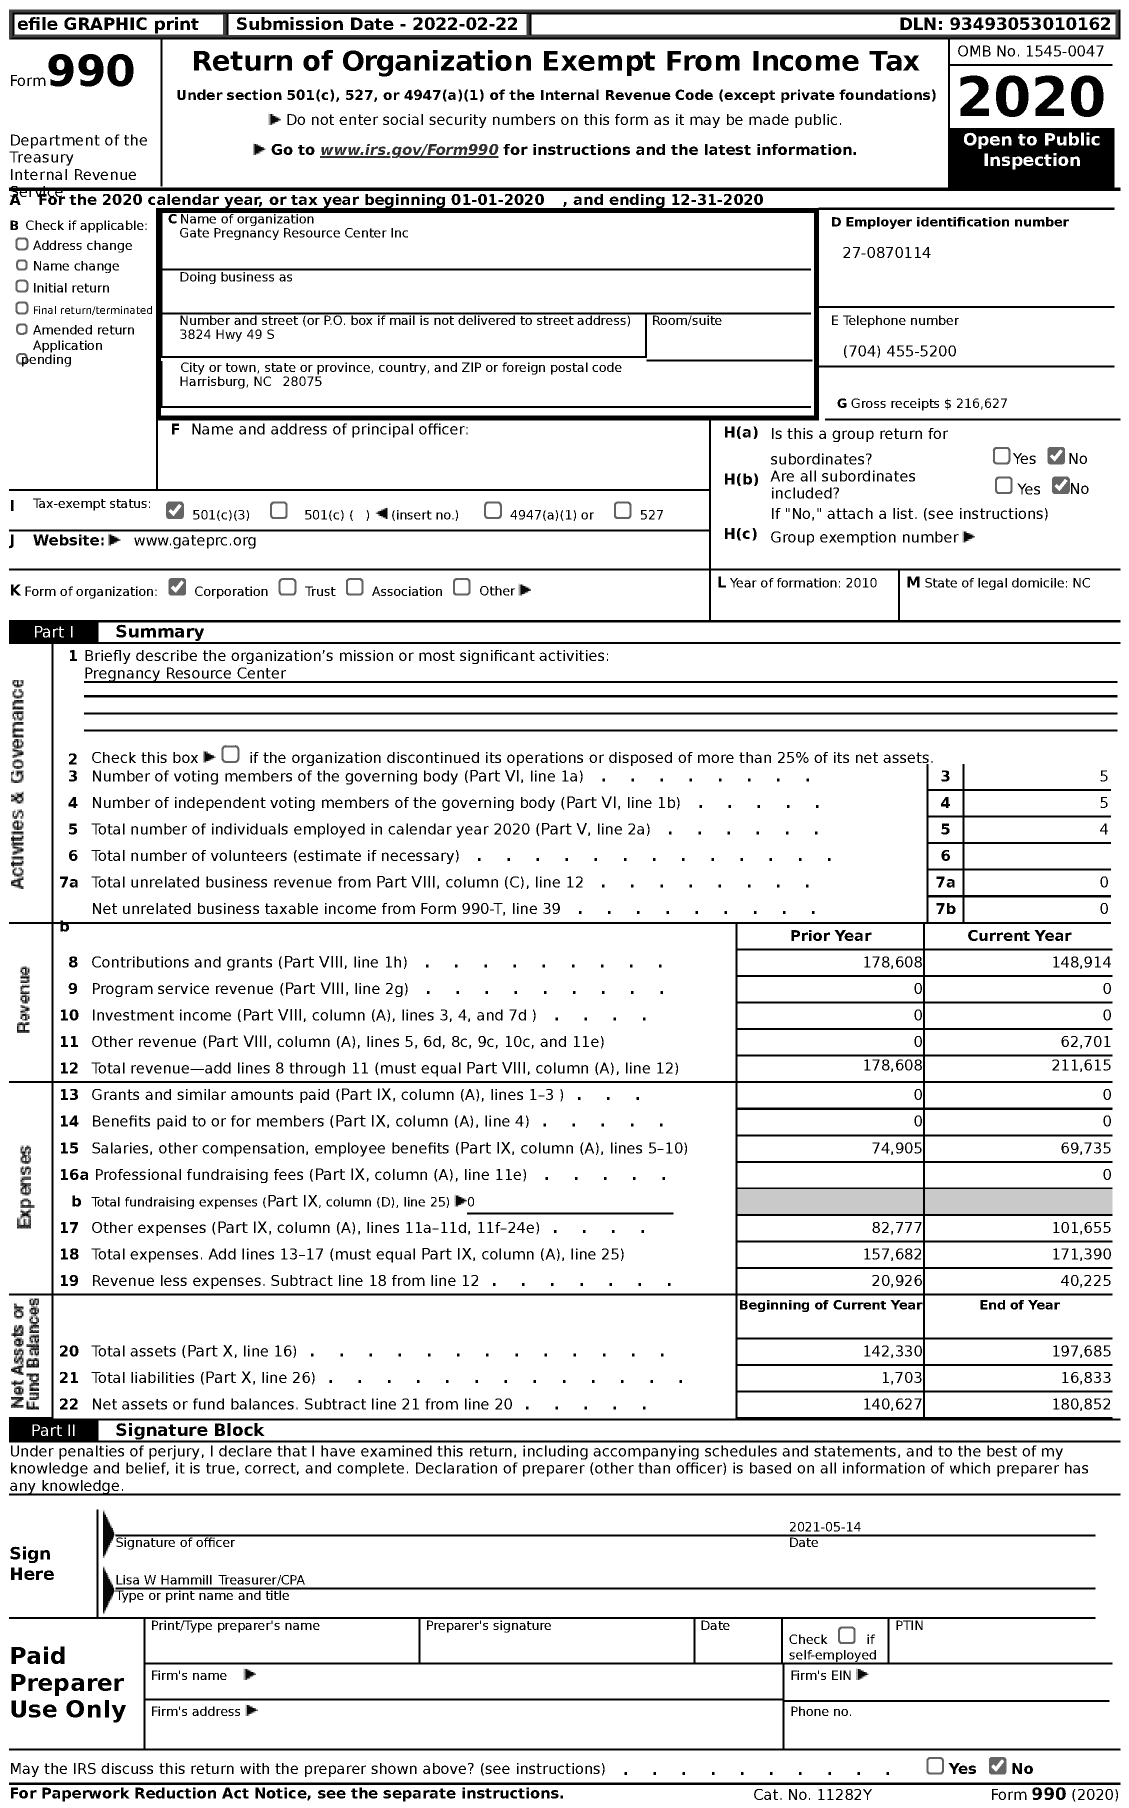 Image of first page of 2020 Form 990 for Gate Pregnancy Resource Center